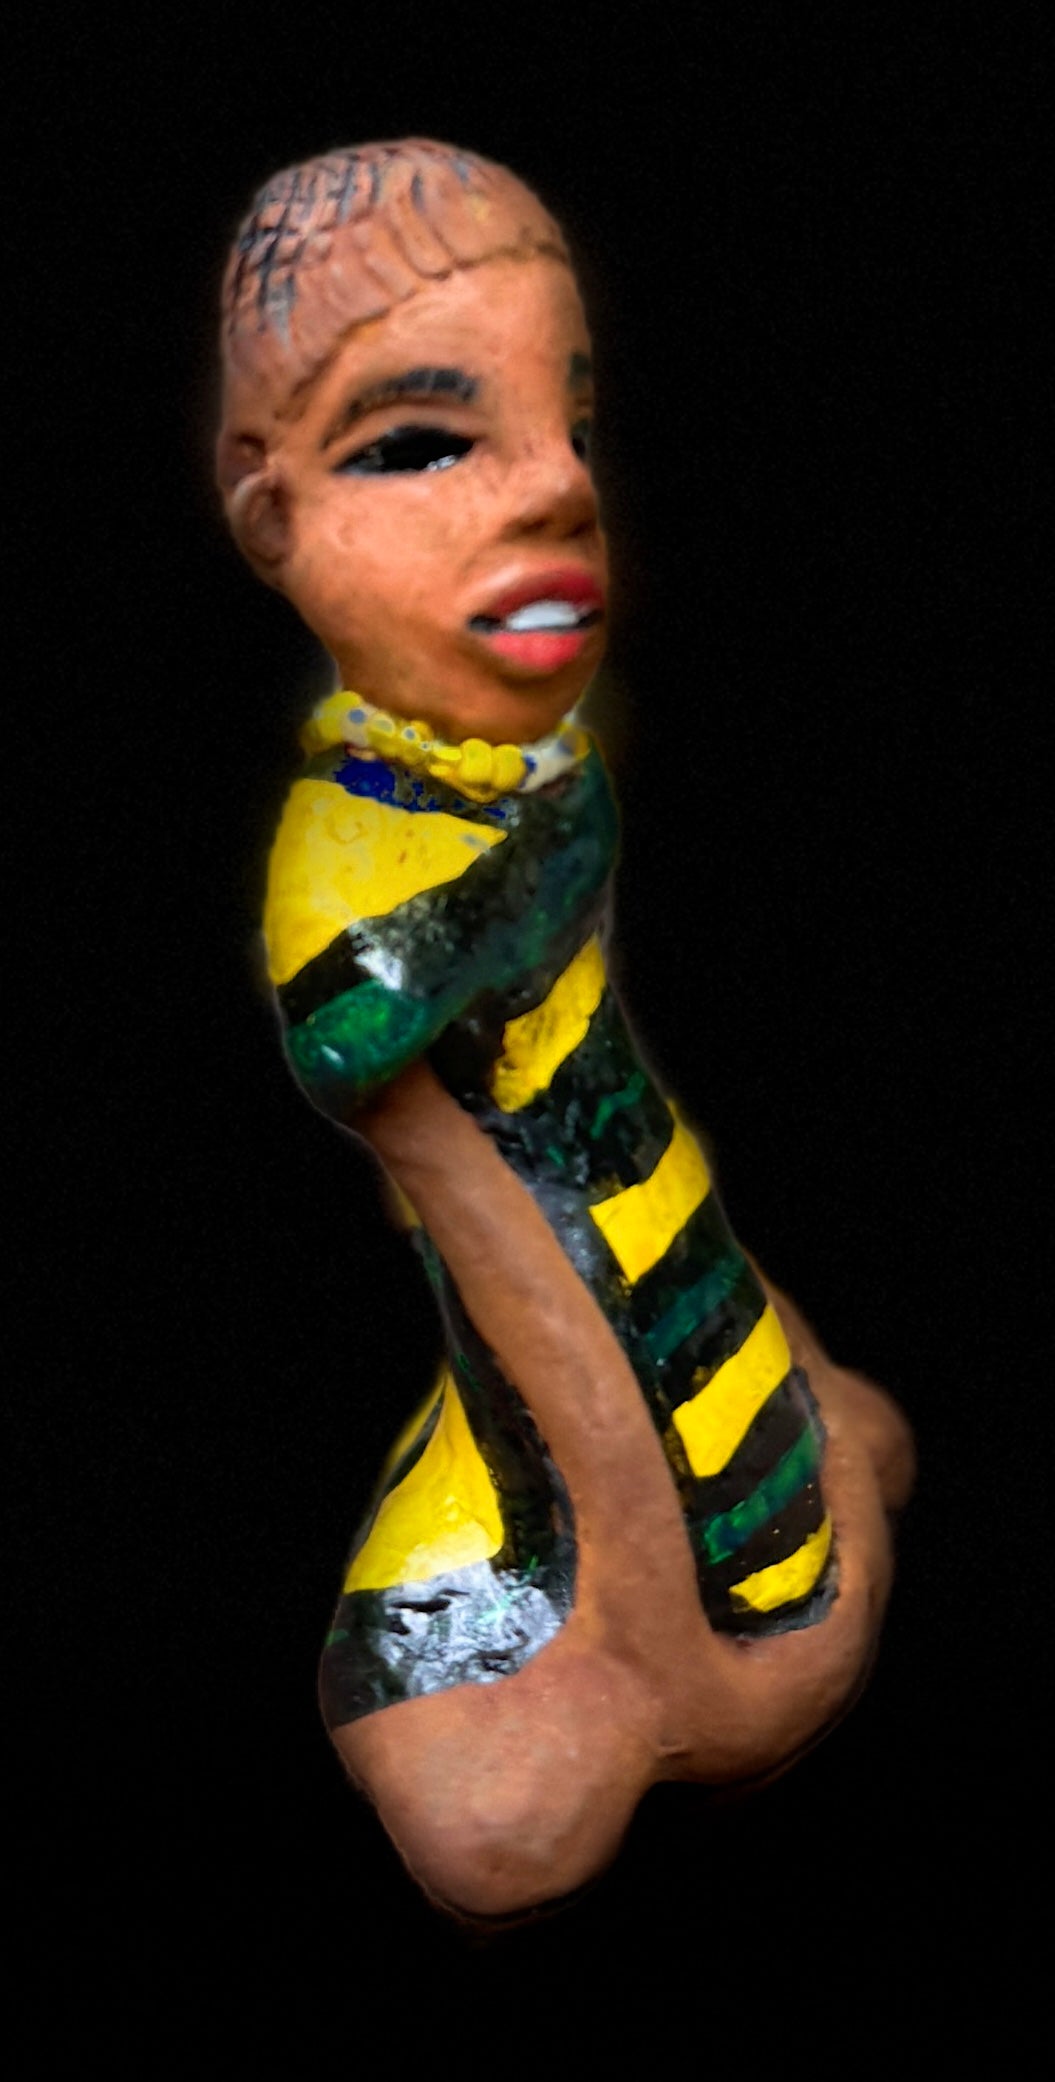 Experience the bold and fearless Kia from the Herdew Collection! This raku fired sculpture stands tall at 6" x 4" x 3" and weighs a brave 9.4 ozs. Clothed in a striking yellow and green dress, Kia's coiled wire hair stretches over 1 foot. With confident outstretched arms, she strikes a yoga pose. Begin your collection with the captivating Kitty and embrace adventure!